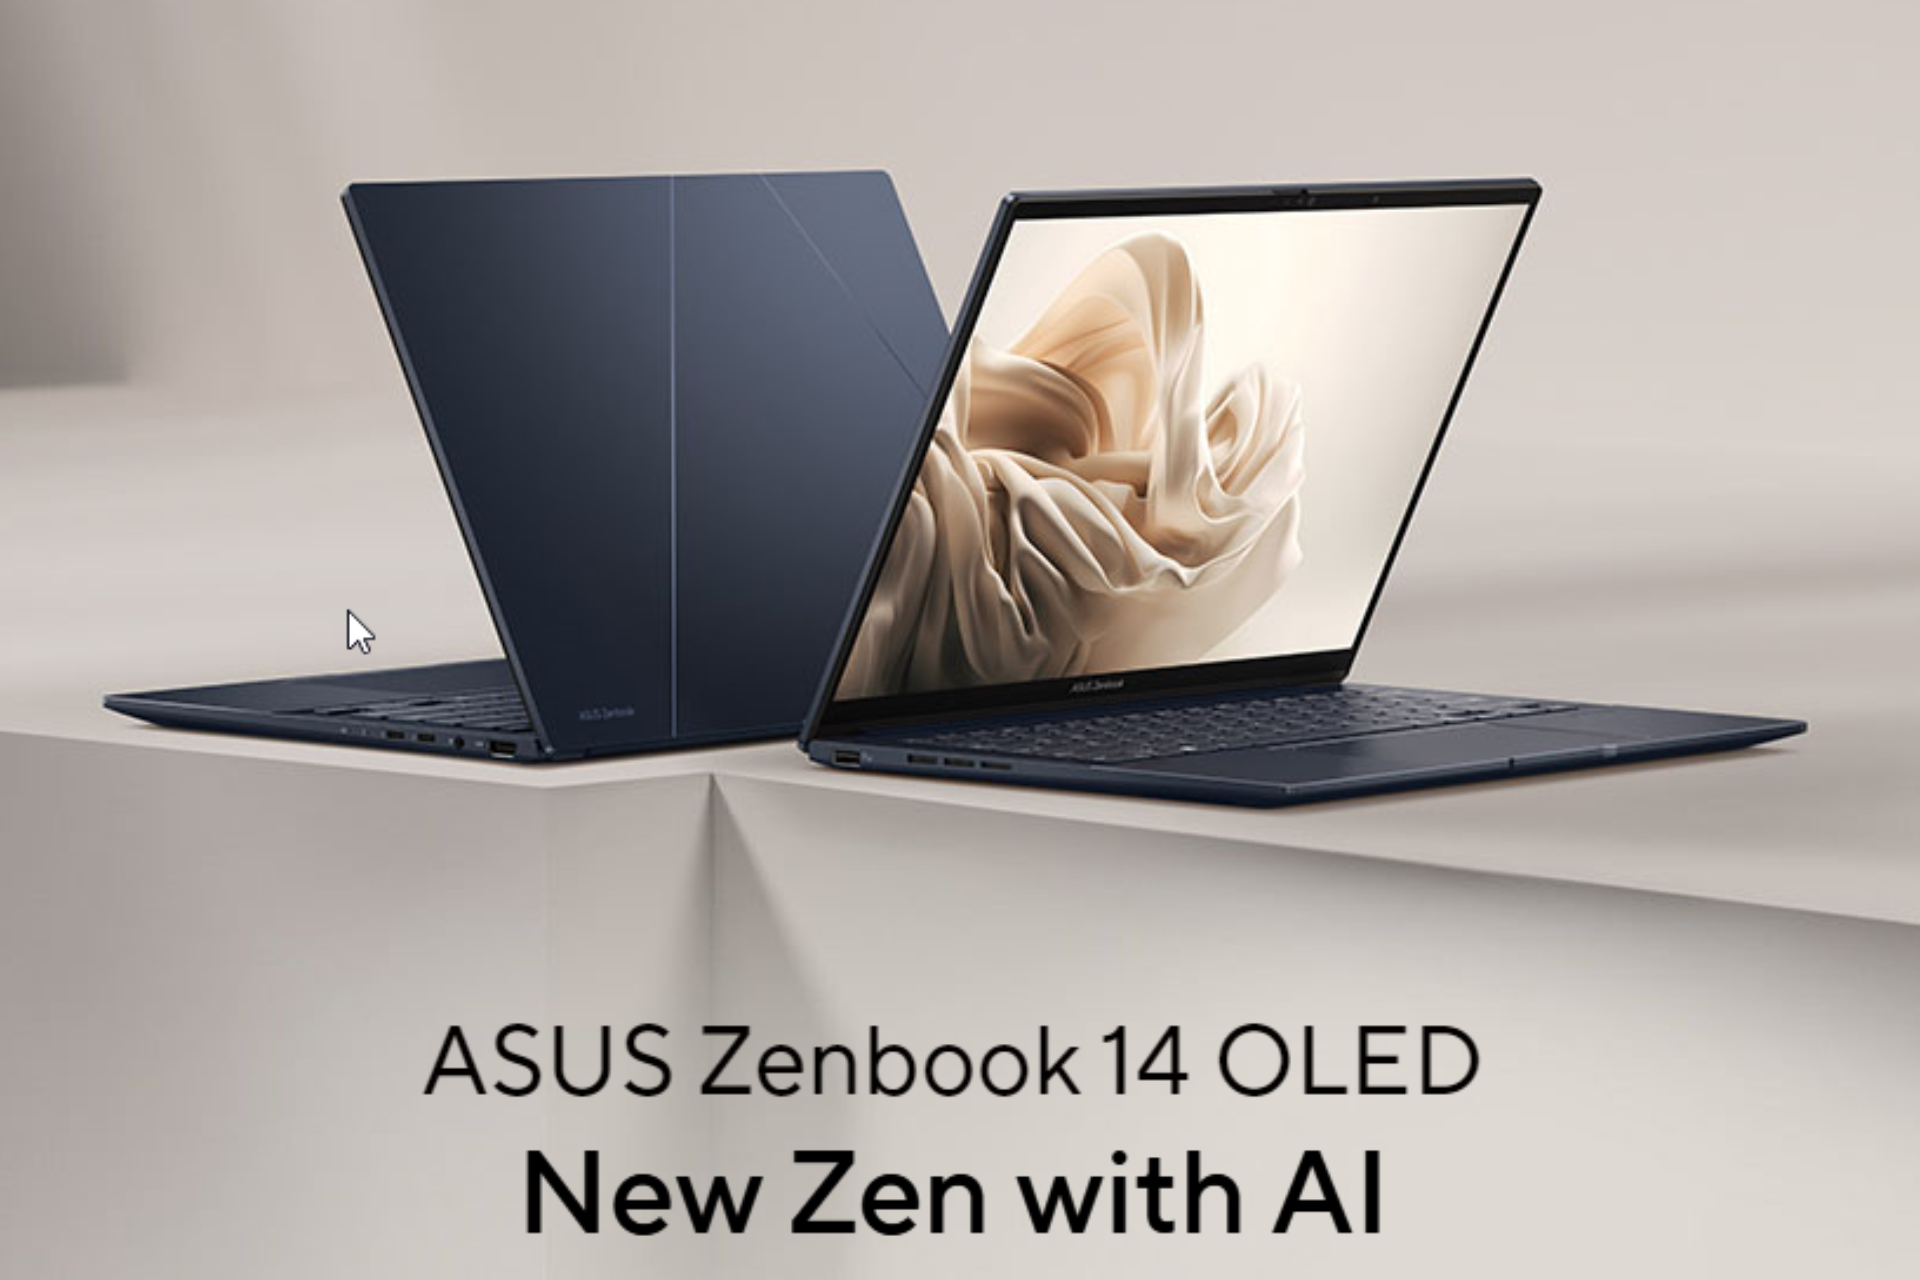 Irresistible deal alert: Get Asus Zenbook 14 OLED powered by Intel Core Ultra 7 CPU at $799